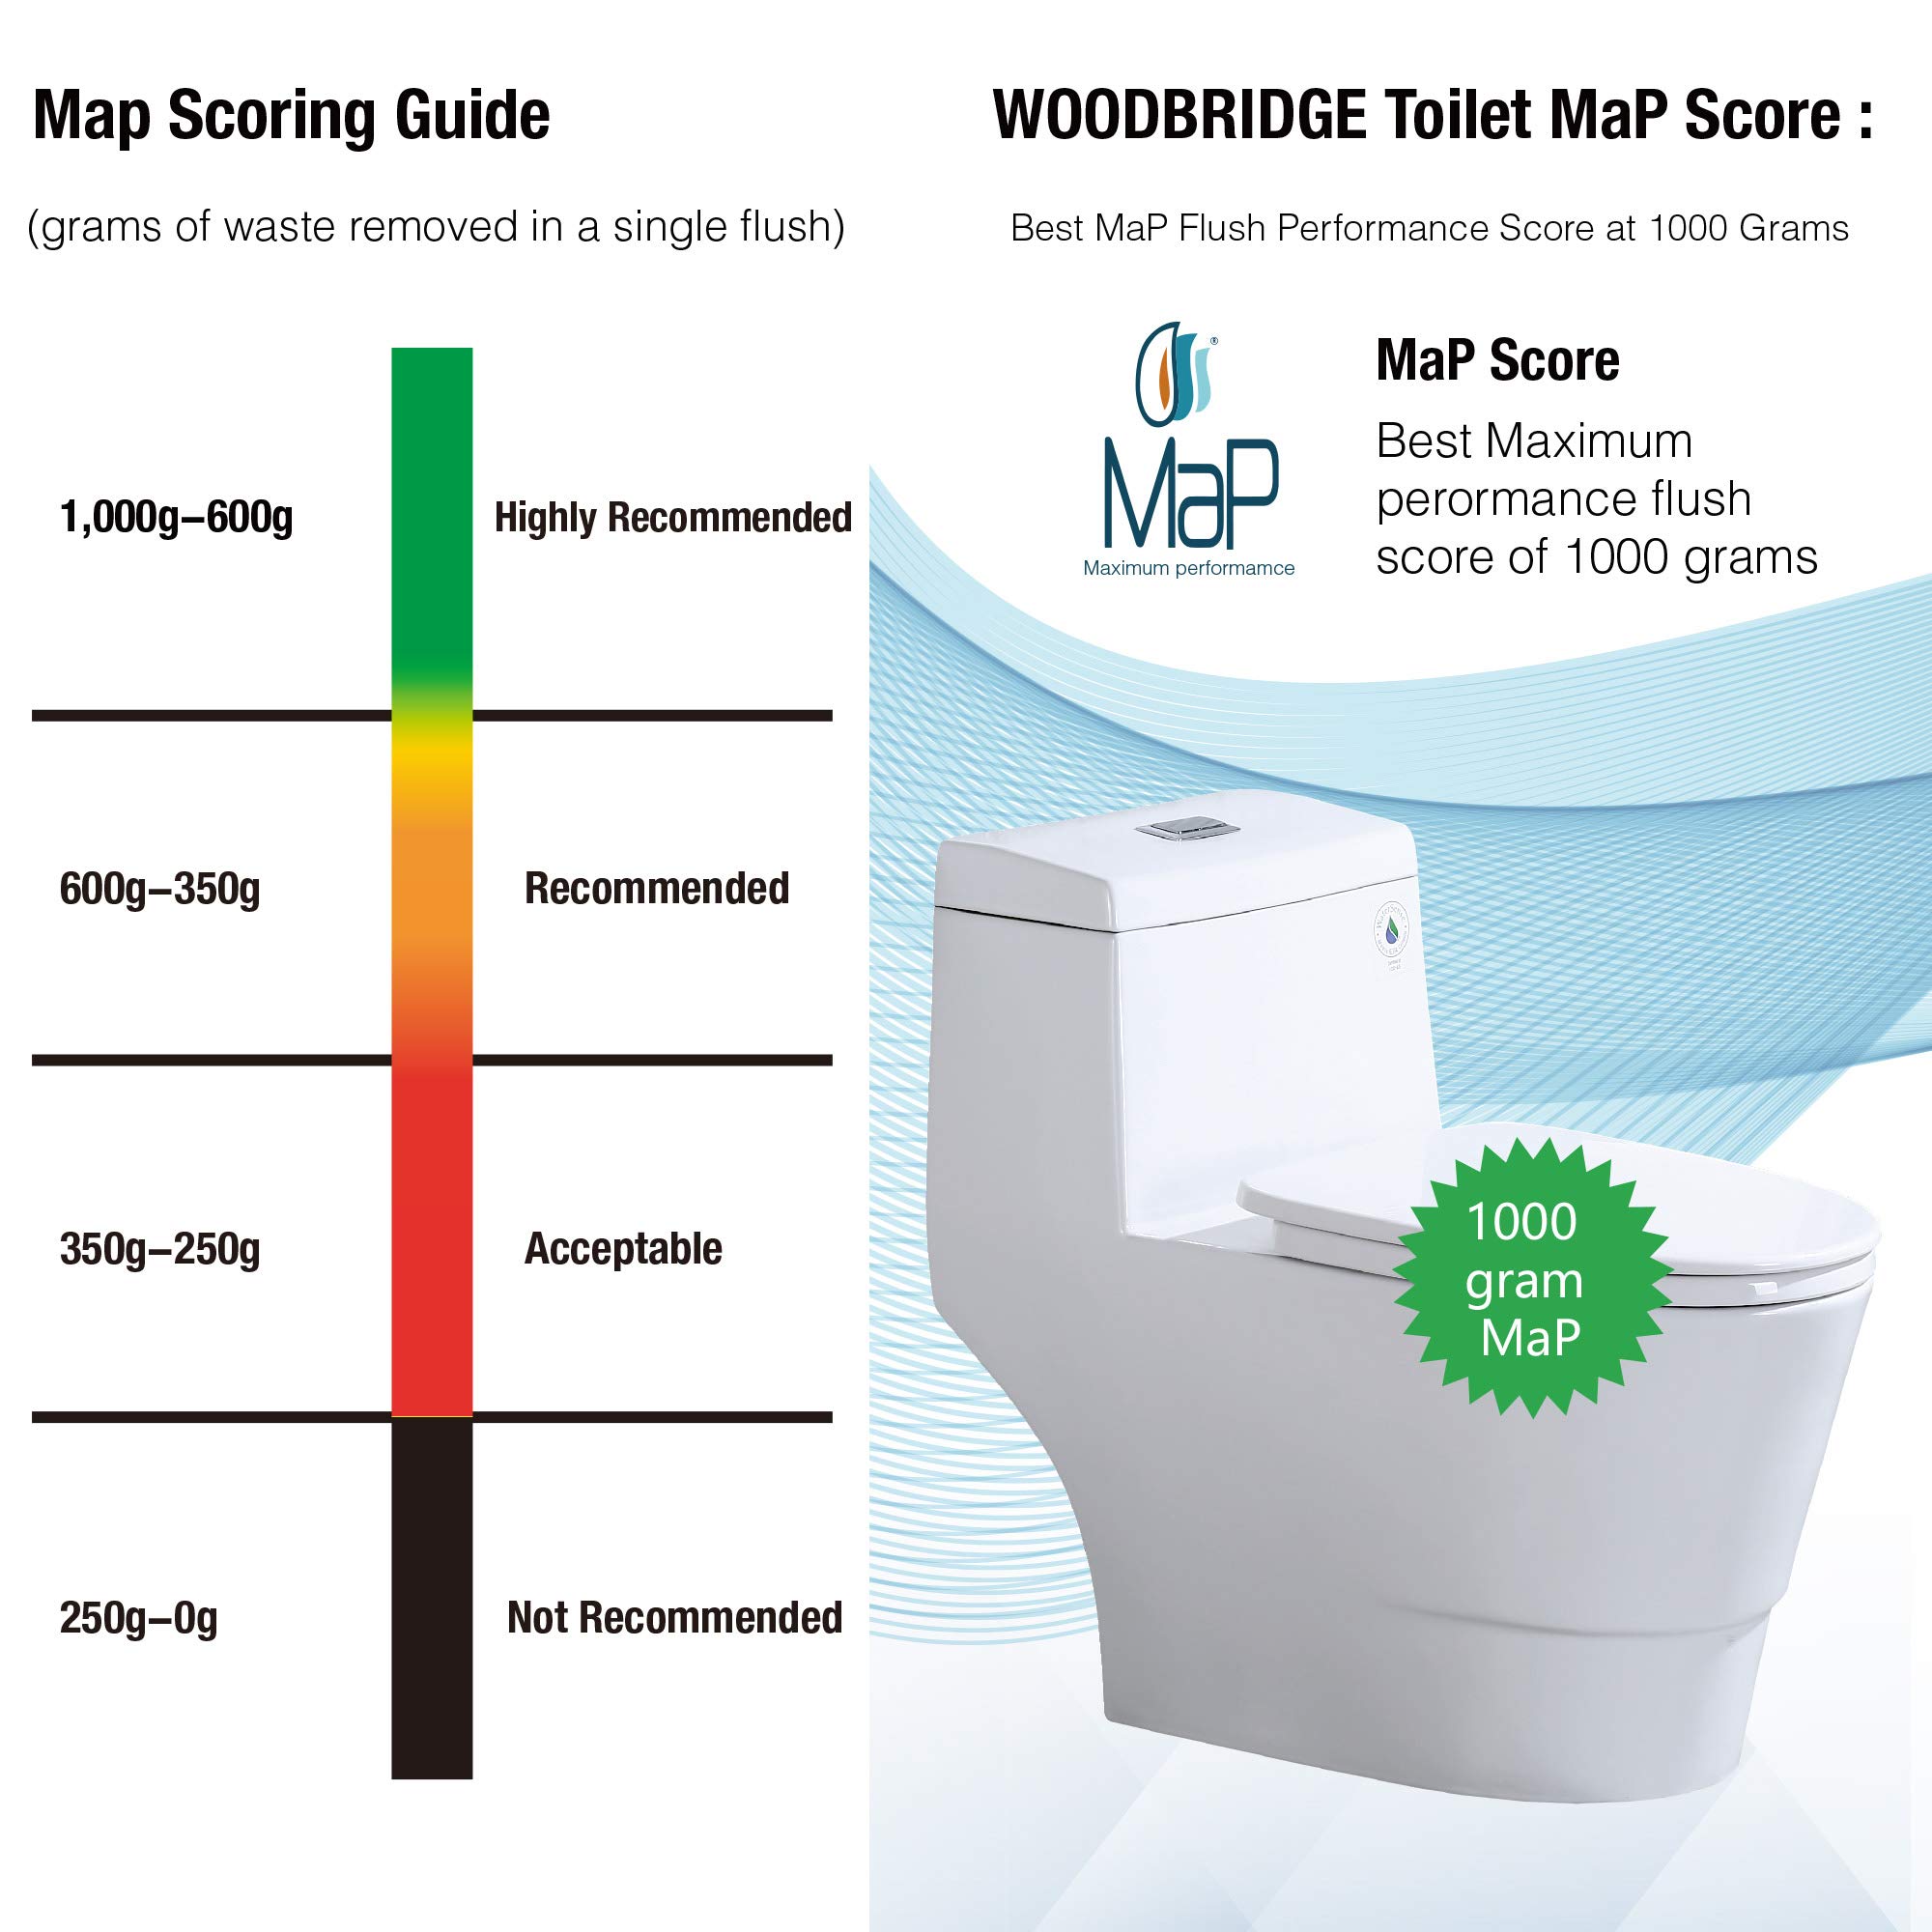 WOODBRIDGE One Piece Toilet with Soft Closing Seat, Chair Height, 1.28 GPF Dual, Water Sensed, 1000 Gram MaP Flushing Score Toilet with Chrome Button T0001-CH, White